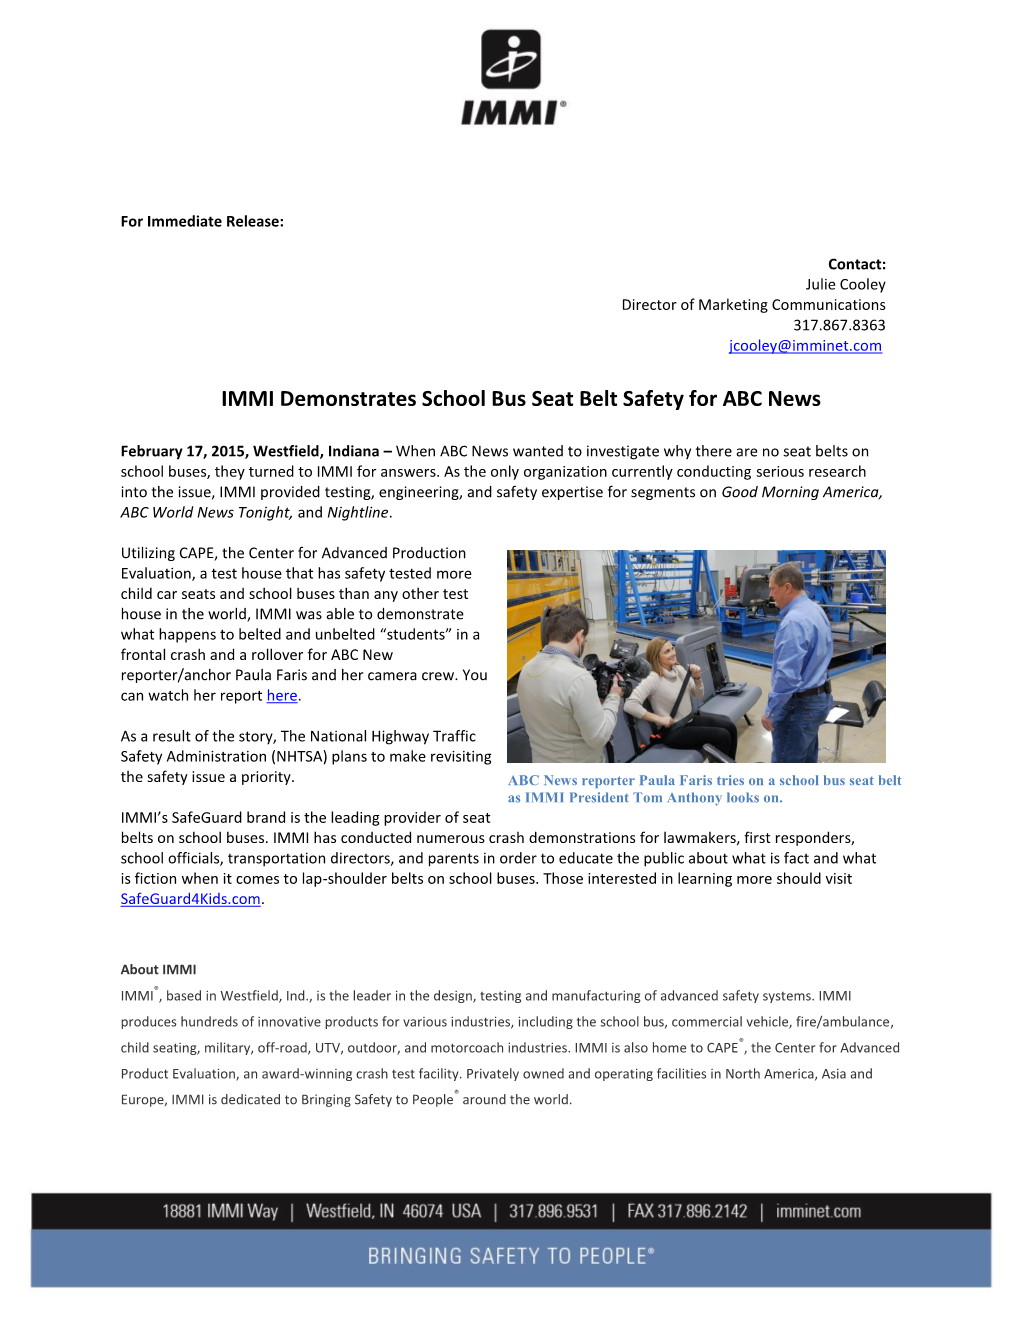 IMMI Demonstrates School Bus Seat Belt Safety for ABC News